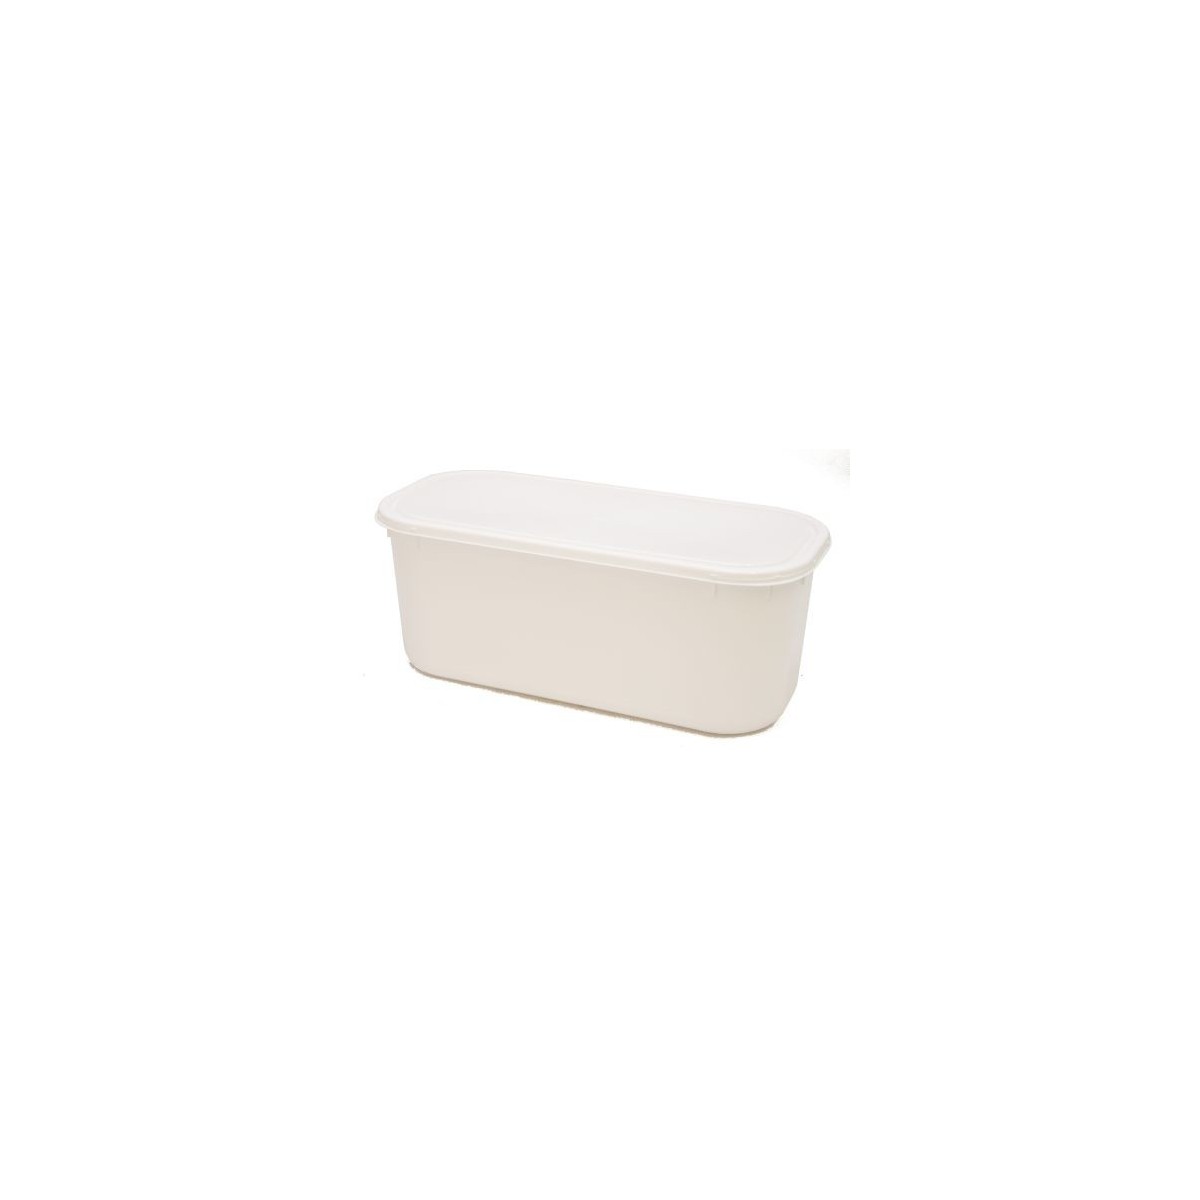 PLASTIC ICE CREAM BOX CADY 5L WITHOUT LID 63 PIECES FOST+2020 INCLUDED 4,69392€  BOX